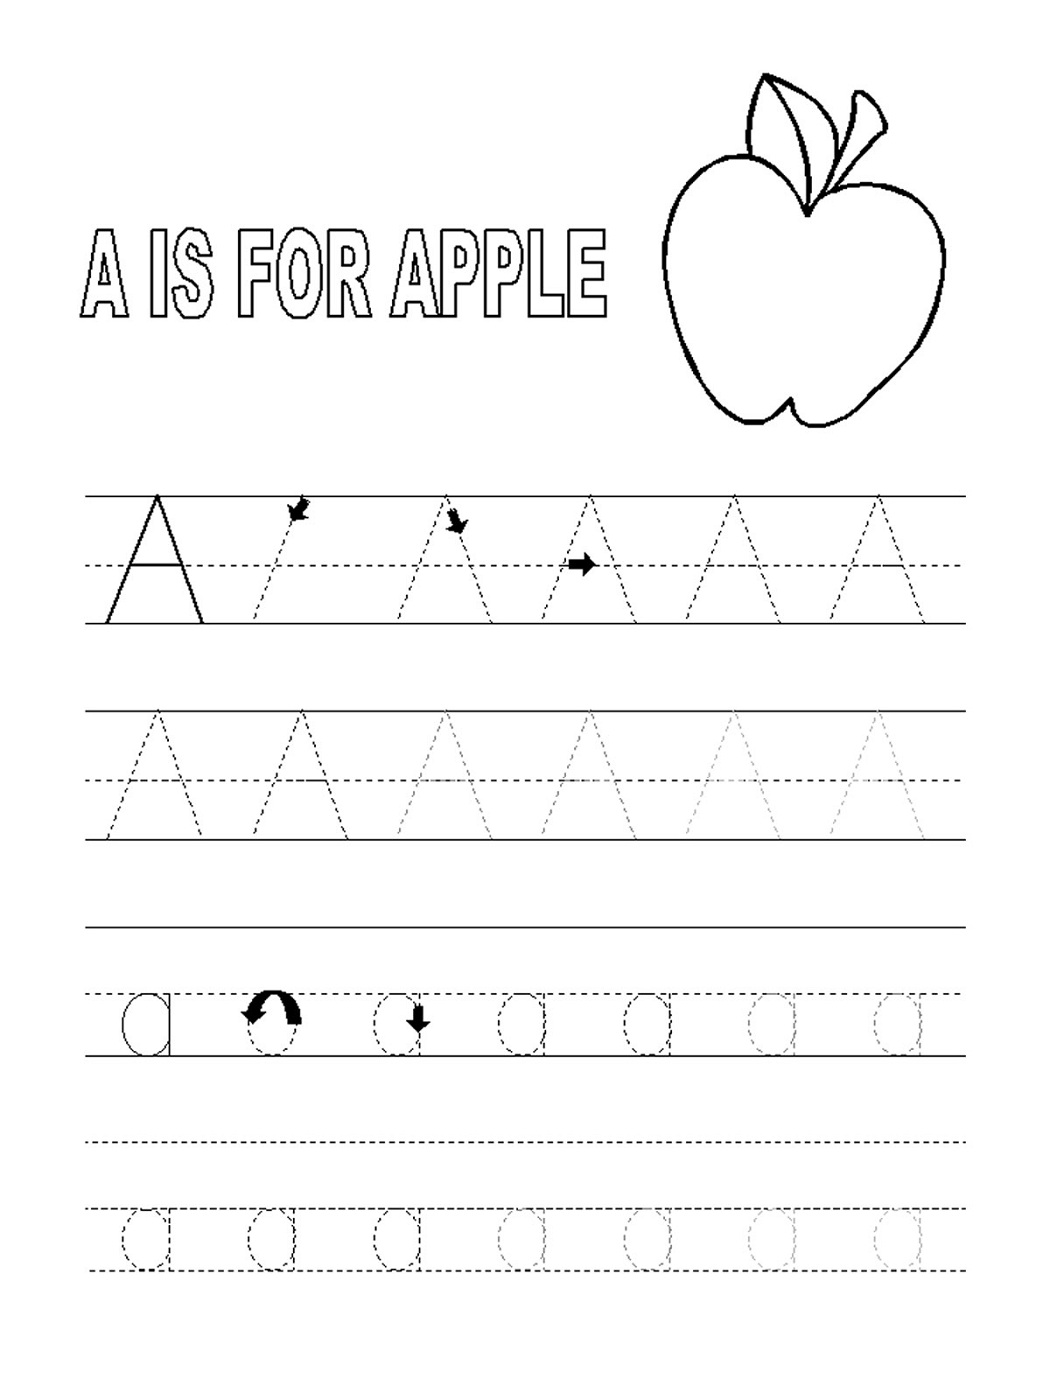 Tracing The Letter A Free Printable Activity Shelter